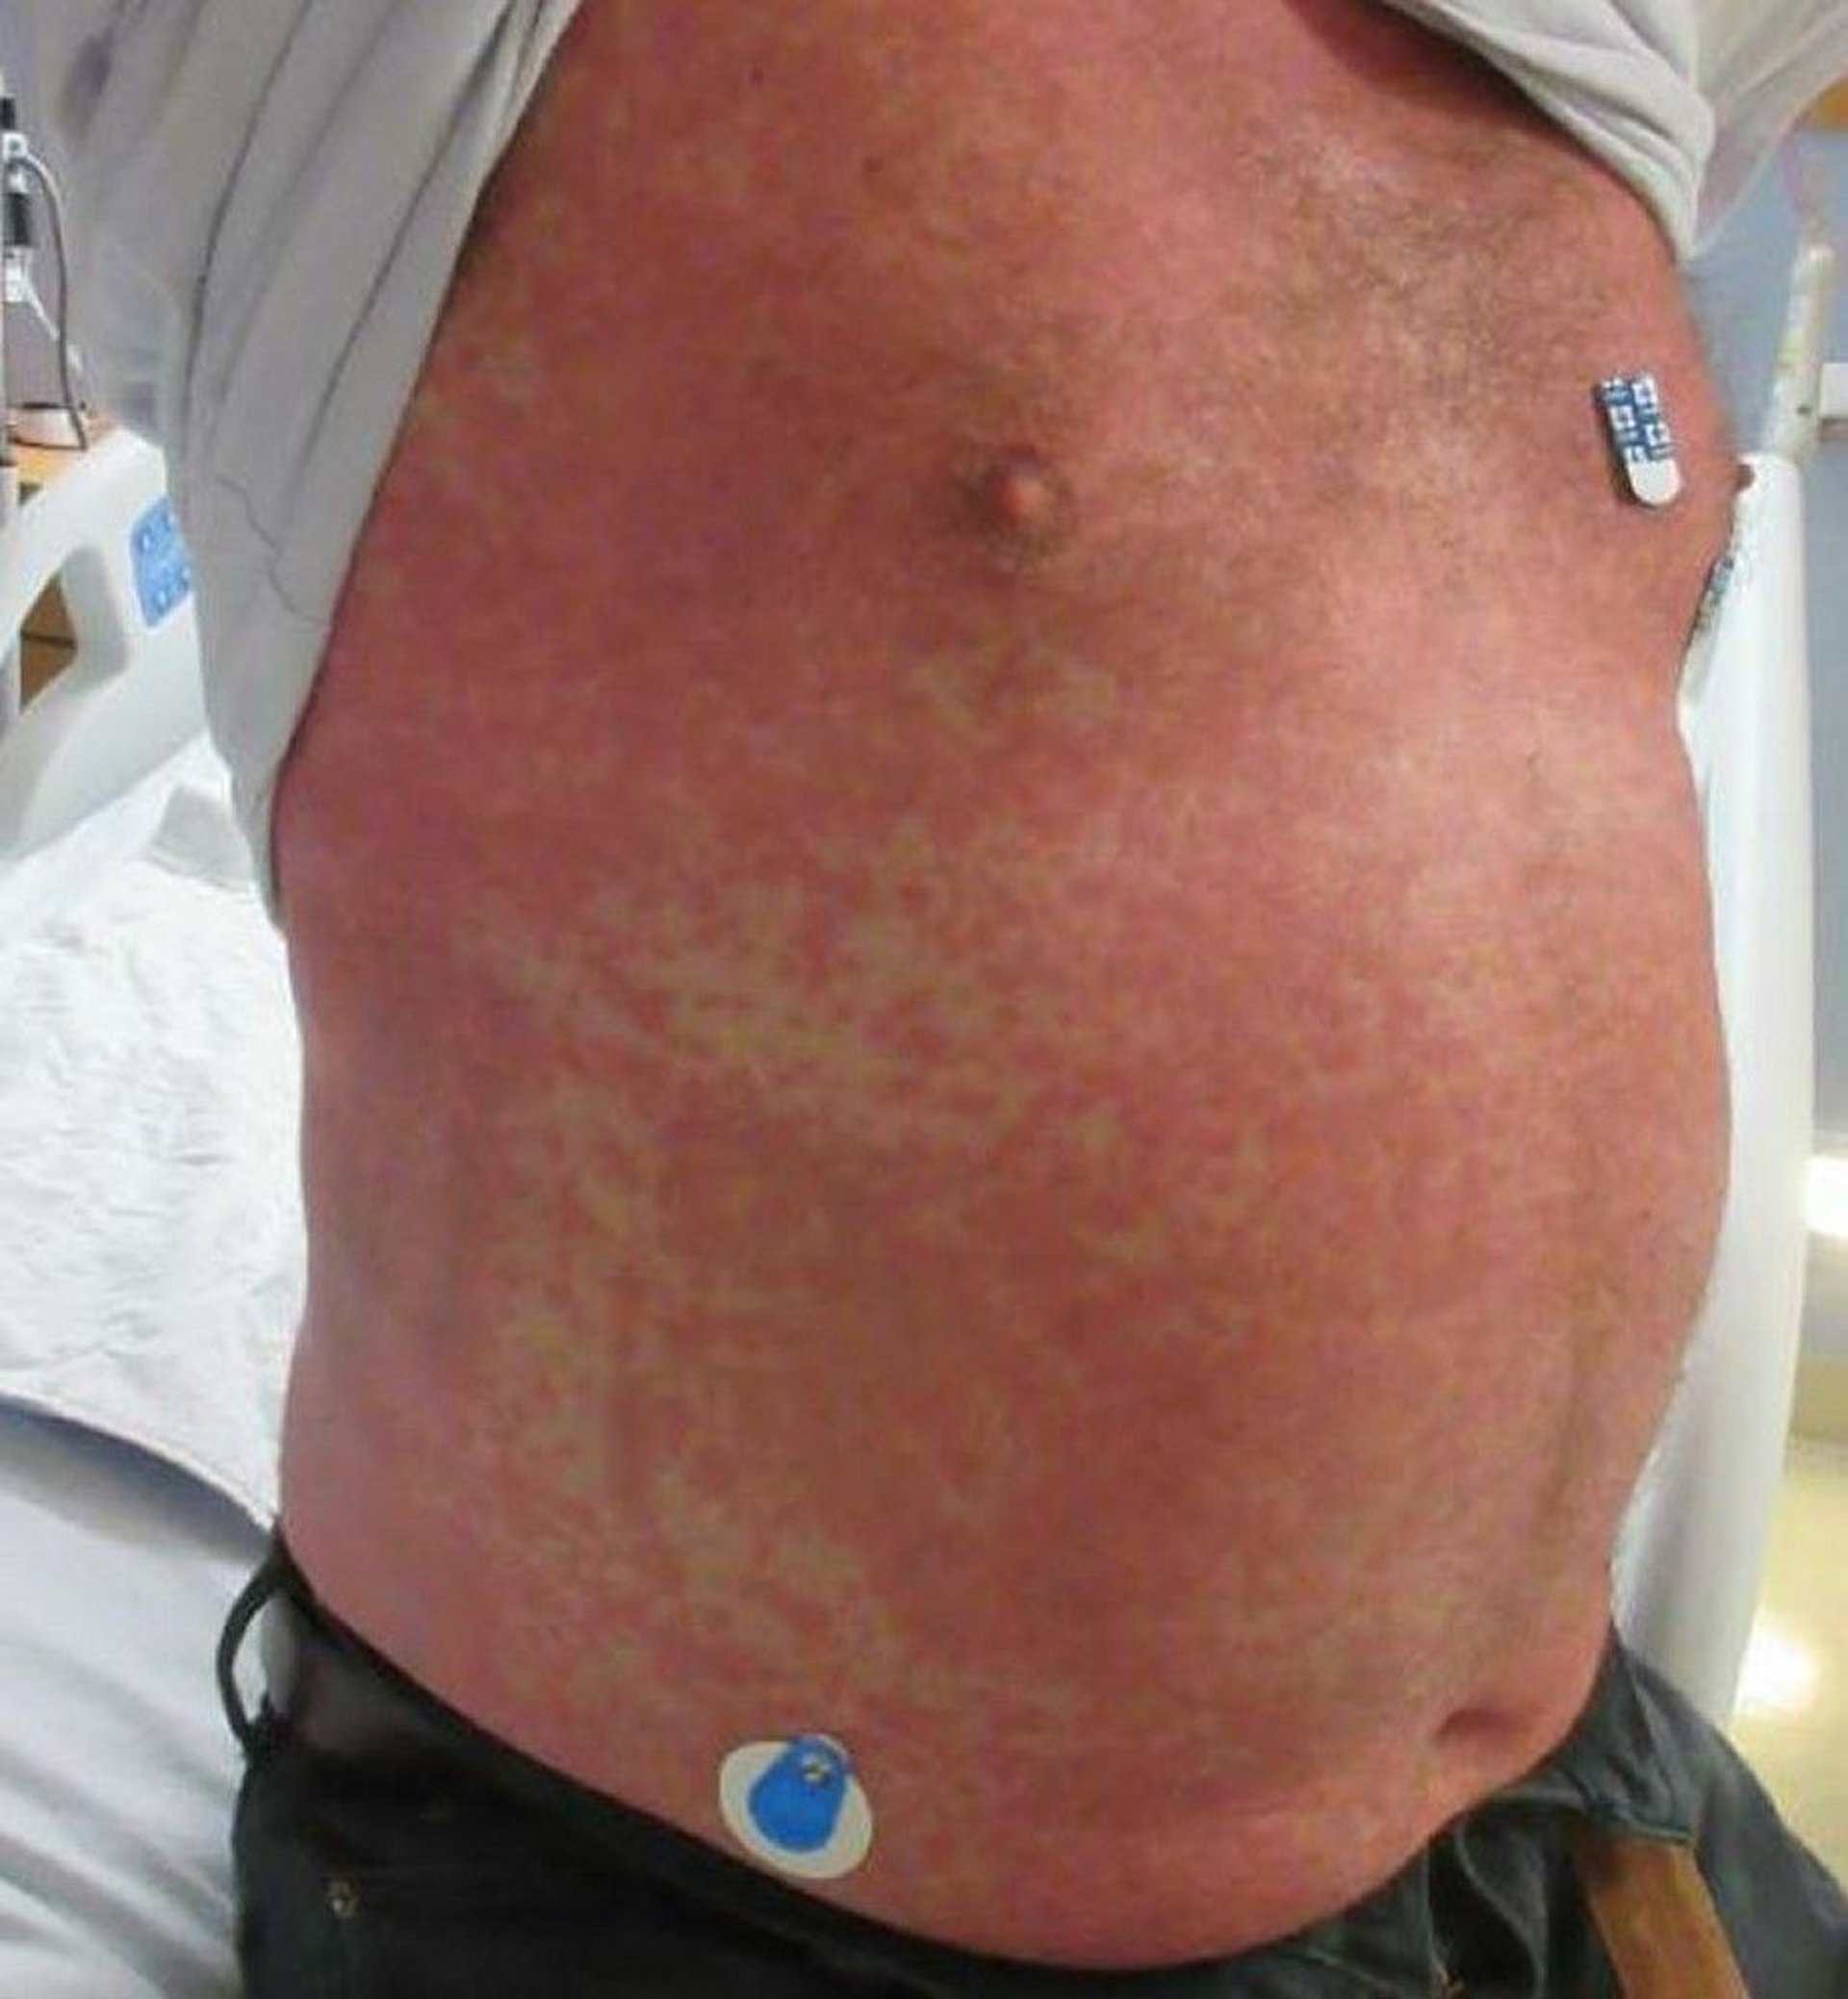 Rash Caused by a Drug Reaction